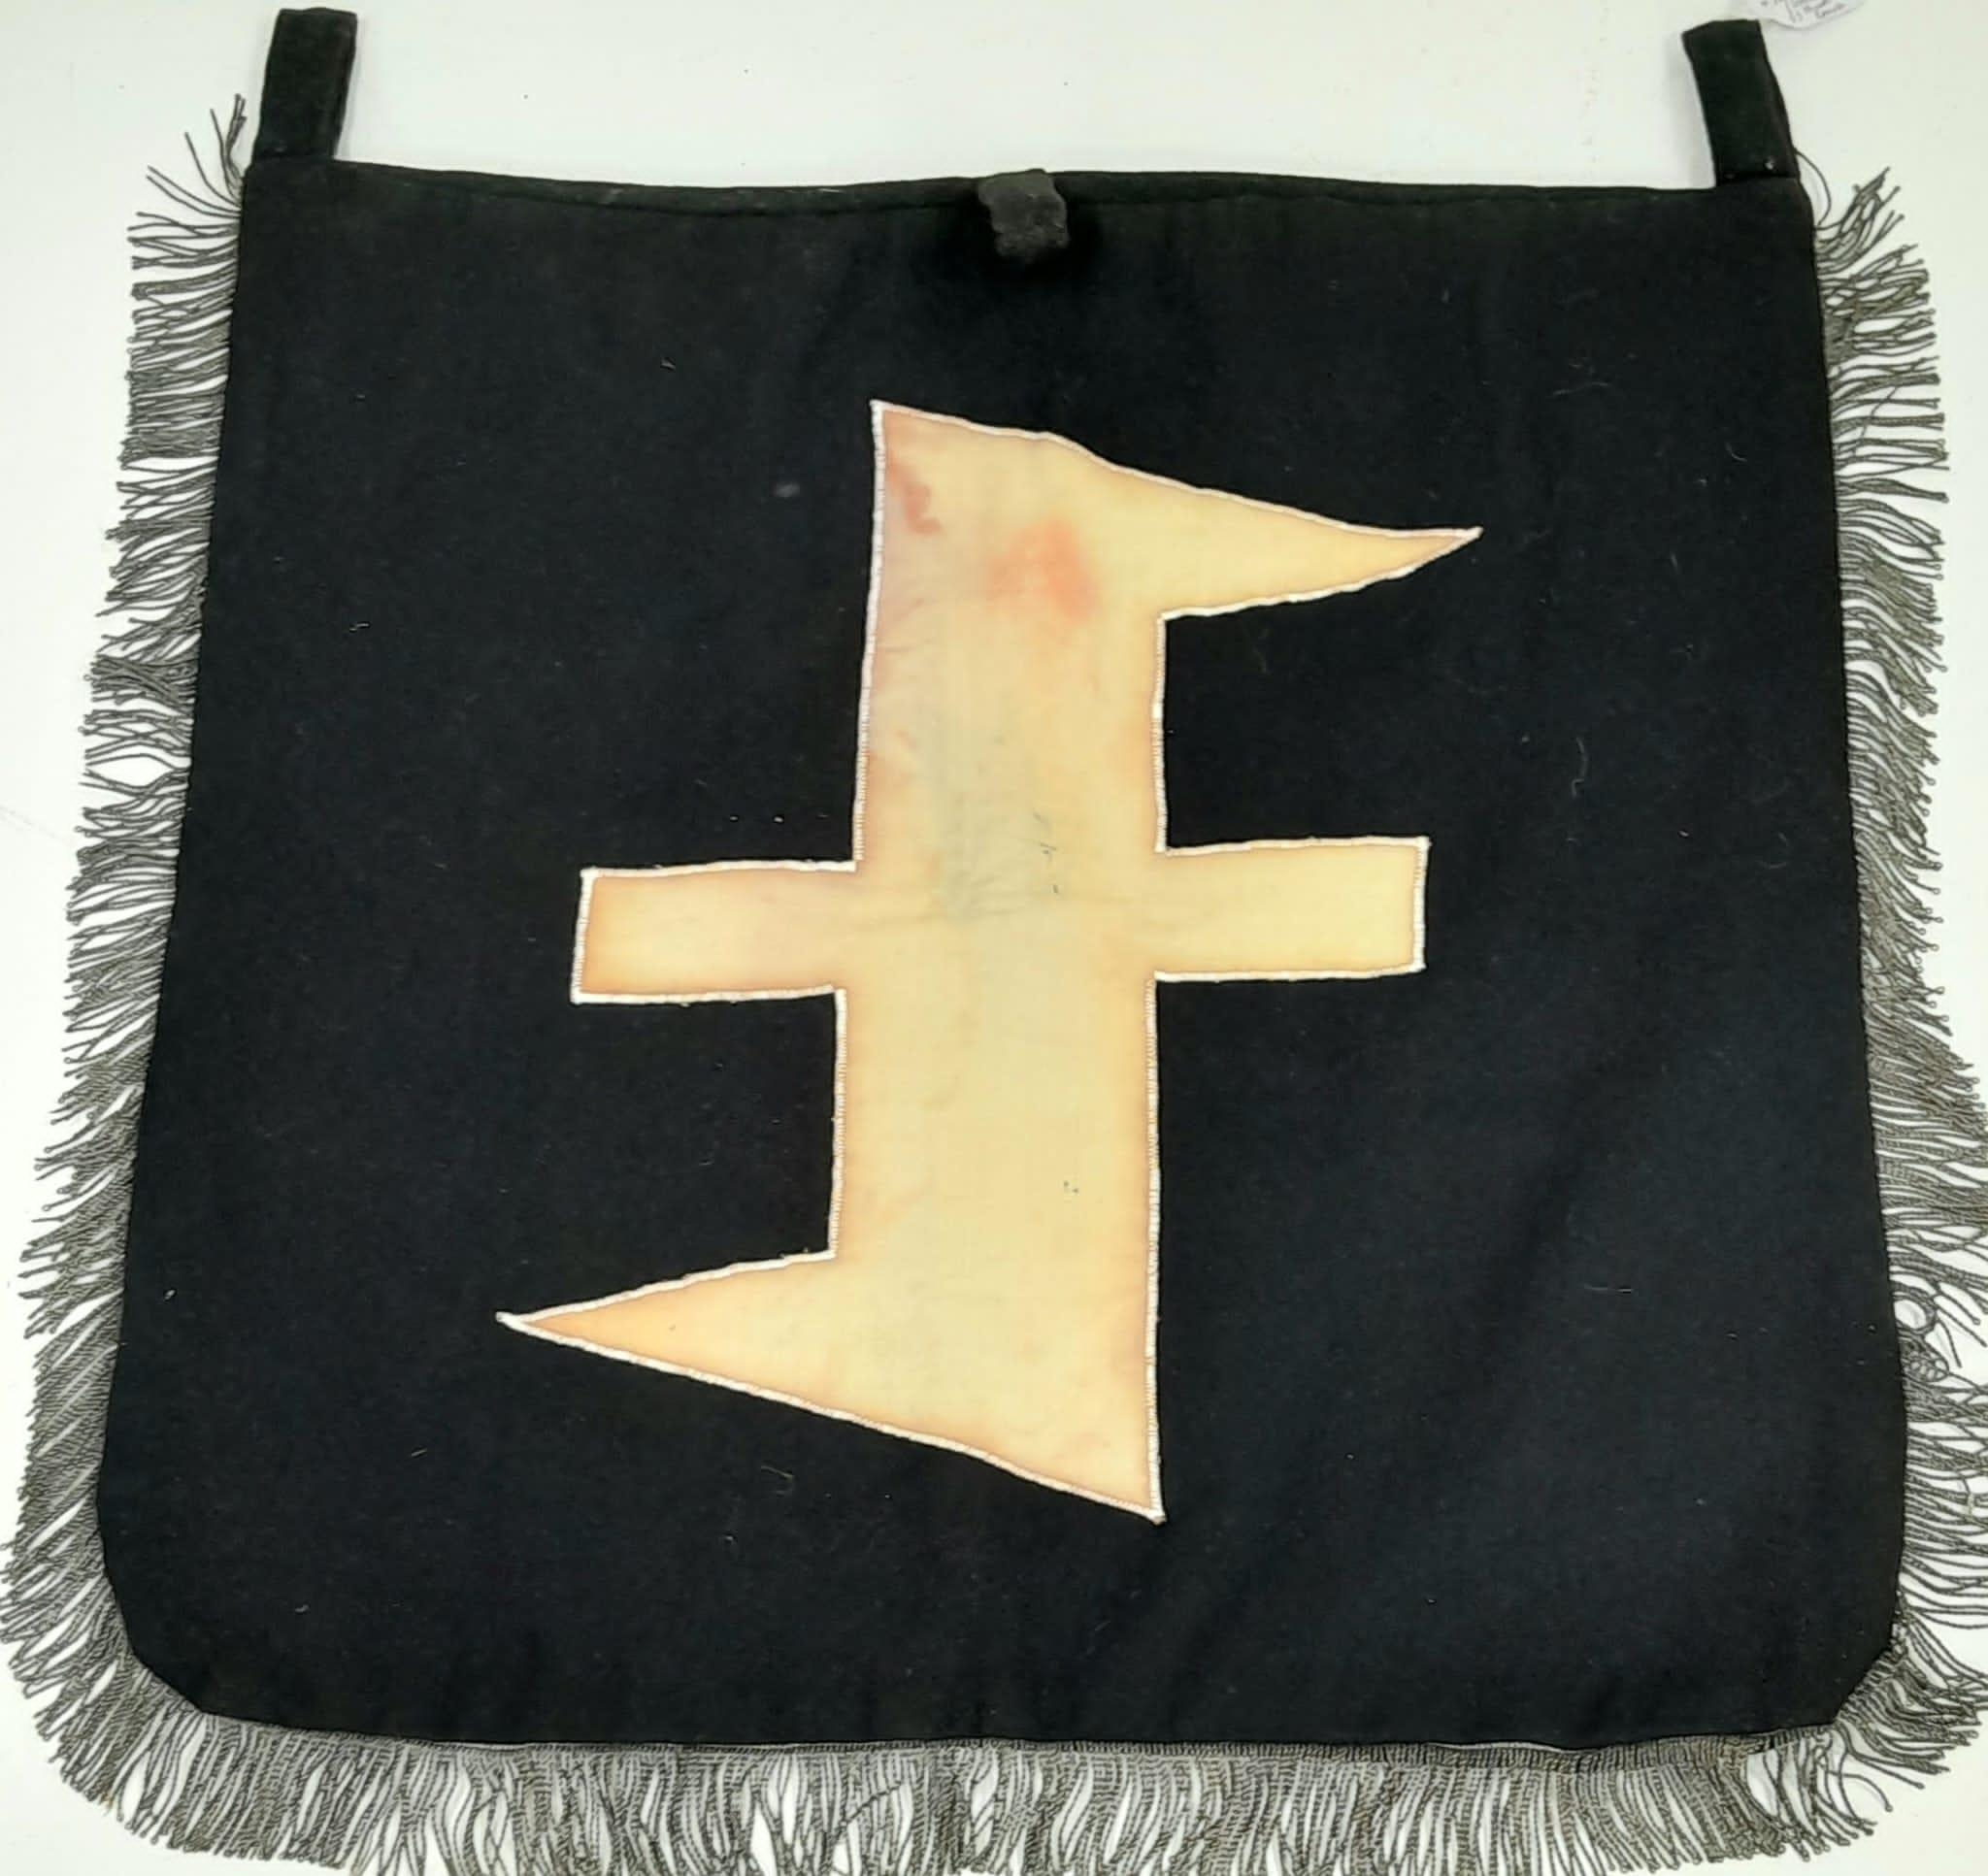 3 rd Reich Netherland Waffen SS Trumpet Banner. Dutch attic find. A little moth nipping here and - Image 3 of 4